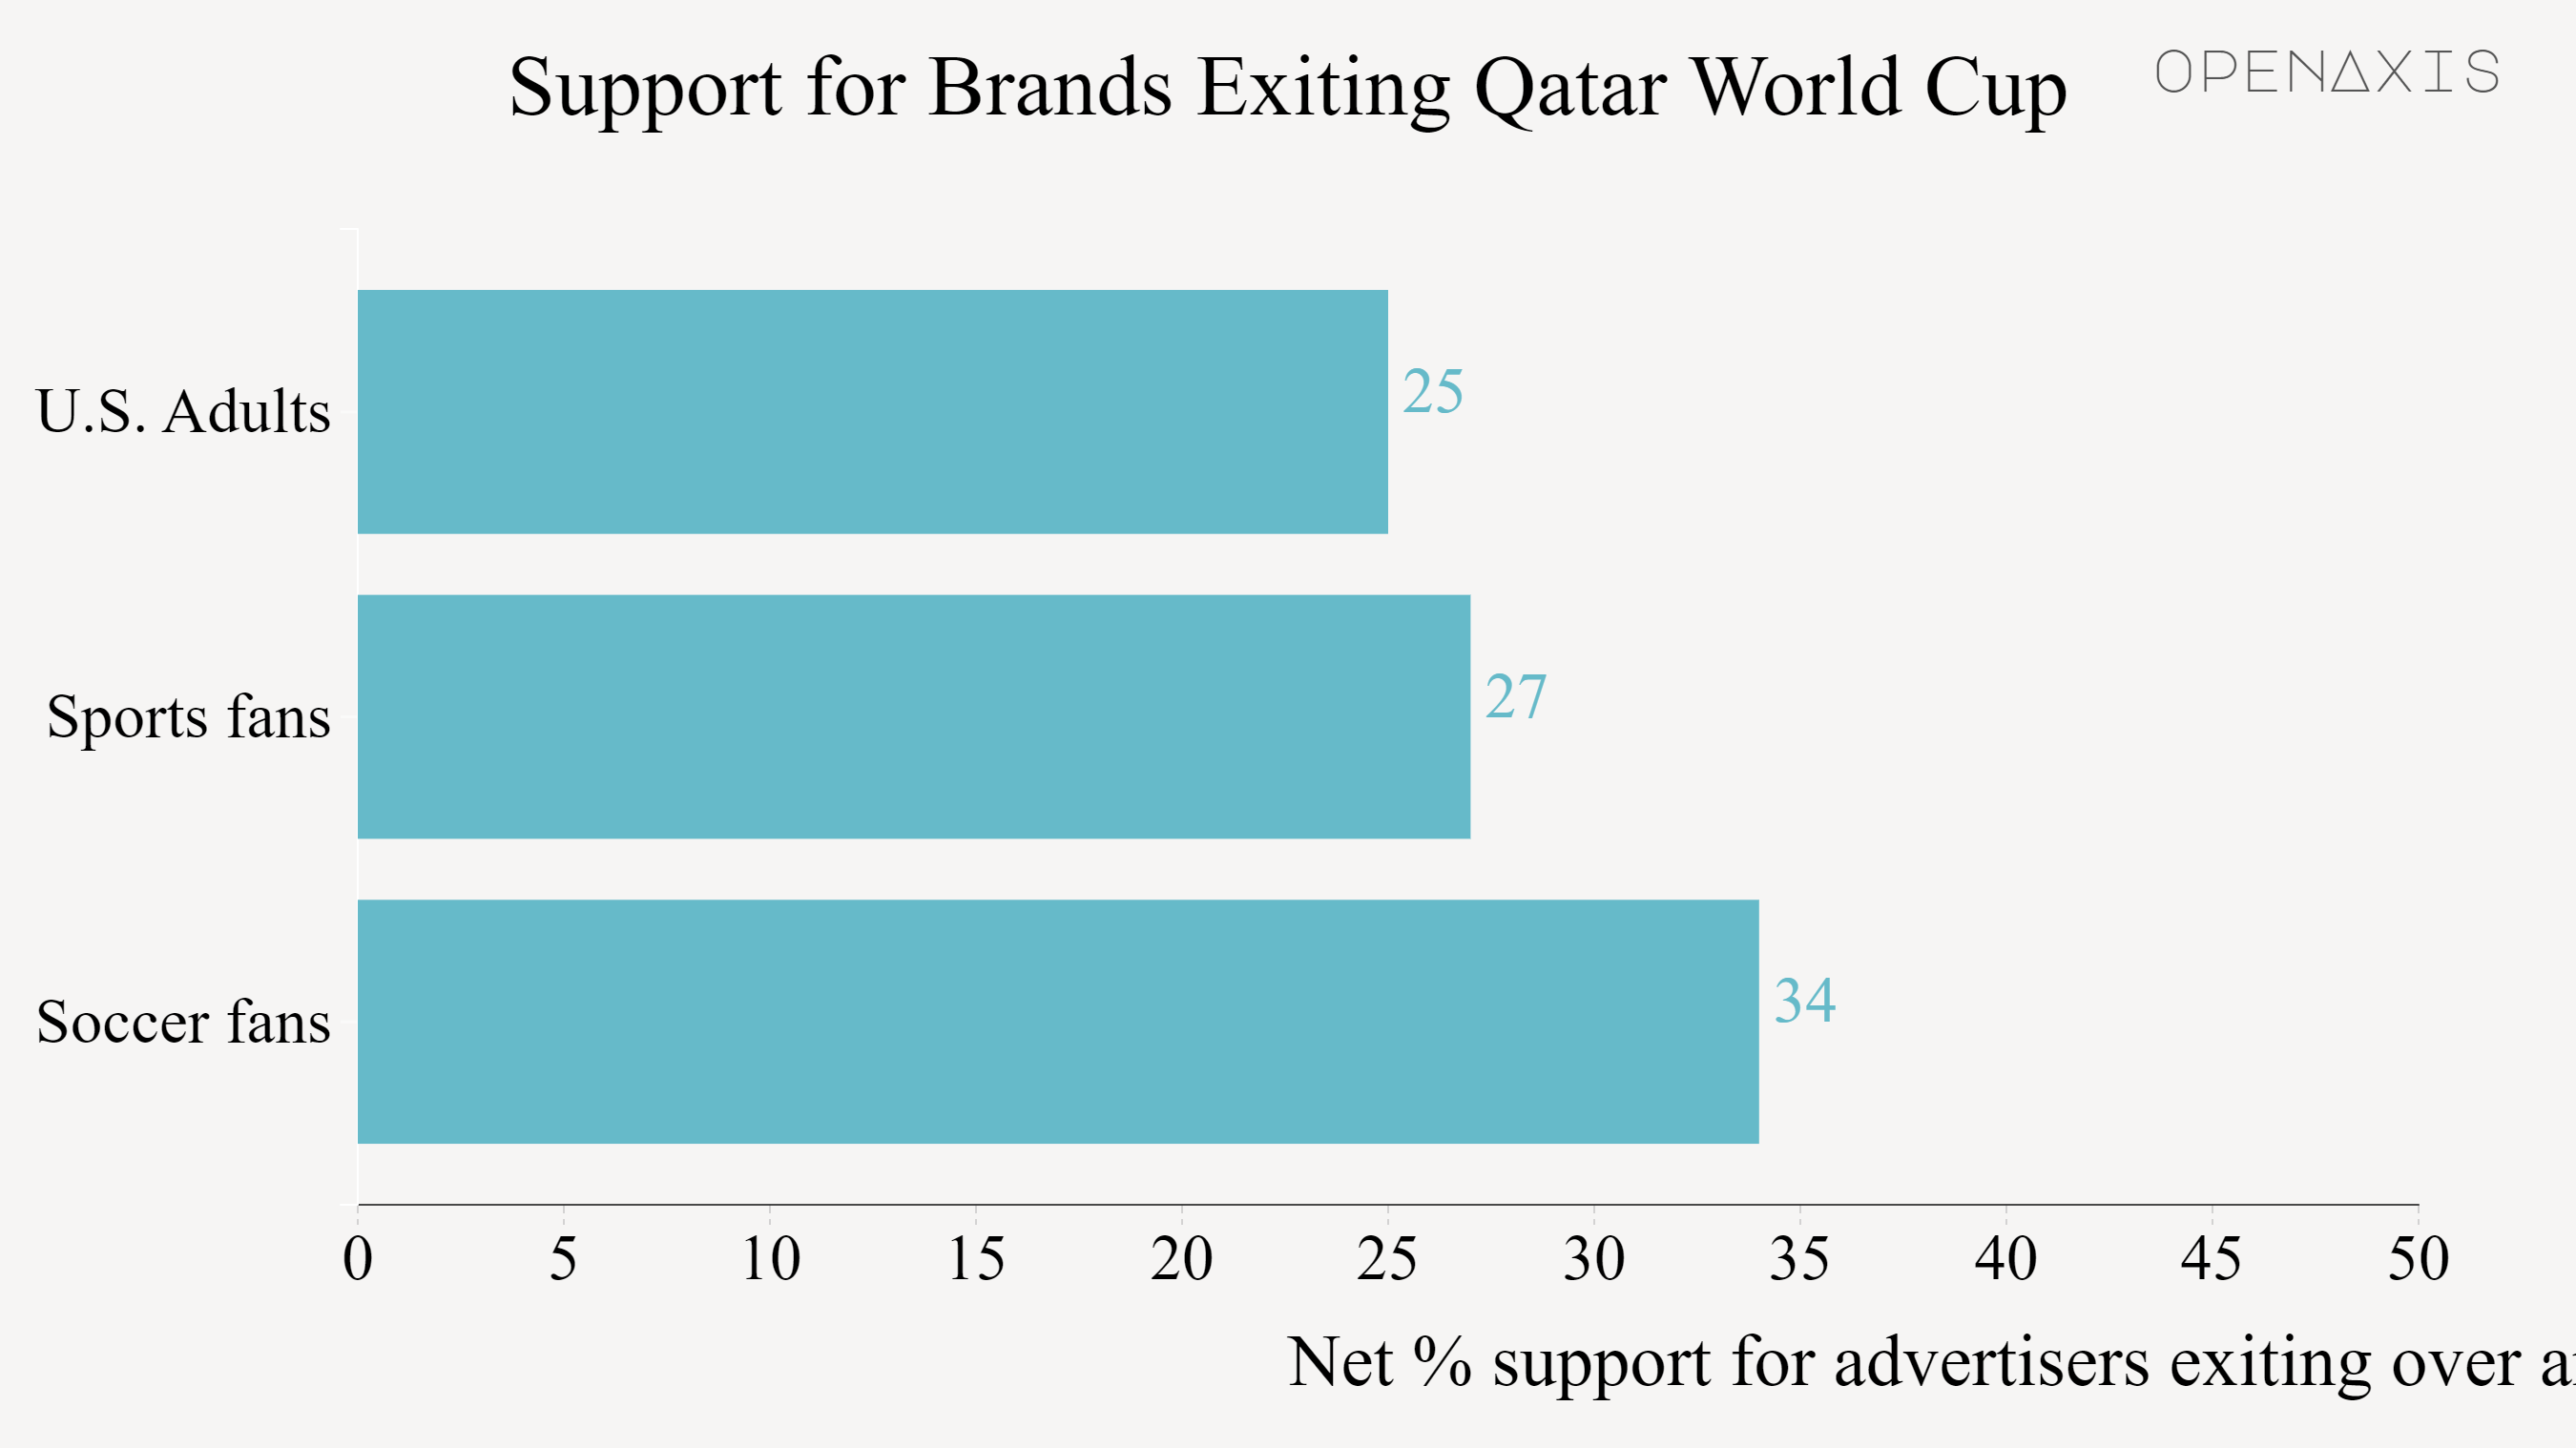 <p>According to the survey, net support among soccer fans for brands pulling out of the Qatar World Cup (the share of those who supported minus the share who opposed) was at least plus-34 for across three separate issues: reports of human rights abuses among migrant workers, reports of FIFA officials being bribed and concerns about state laws against homosexuality.</p><p><br /></p><p><span data-index="0" data-denotation-char data-id="0" data-value="&lt;a href=&quot;/search?q=%23humanrights&quot; target=_self&gt;#humanrights" data-link="/search?q=%23humanrights">﻿<span contenteditable="false"><span></span><a href="/search?q=%23humanrights" target="_self">#humanrights</a></span>﻿</span> <span data-index="0" data-denotation-char data-id="0" data-value="&lt;a href=&quot;/search?q=%23lgbtq&quot; target=_self&gt;#lgbtq" data-link="/search?q=%23lgbtq">﻿<span contenteditable="false"><span></span><a href="/search?q=%23lgbtq" target="_self">#lgbtq</a></span>﻿</span> <span data-index="0" data-denotation-char data-id="0" data-value="&lt;a href=&quot;/search?q=%23brands&quot; target=_self&gt;#brands" data-link="/search?q=%23brands">﻿<span contenteditable="false"><span></span><a href="/search?q=%23brands" target="_self">#brands</a></span>﻿</span> <span data-index="0" data-denotation-char data-id="0" data-value="&lt;a href=&quot;/search?q=%23pridemonth&quot; target=_self&gt;#pridemonth" data-link="/search?q=%23pridemonth">﻿<span contenteditable="false"><span></span><a href="/search?q=%23pridemonth" target="_self">#pridemonth</a></span>﻿</span></p><p><br /></p><p>Source: <a href="/data/3825" target="_blank">Morning Consult</a></p><p><br /></p>